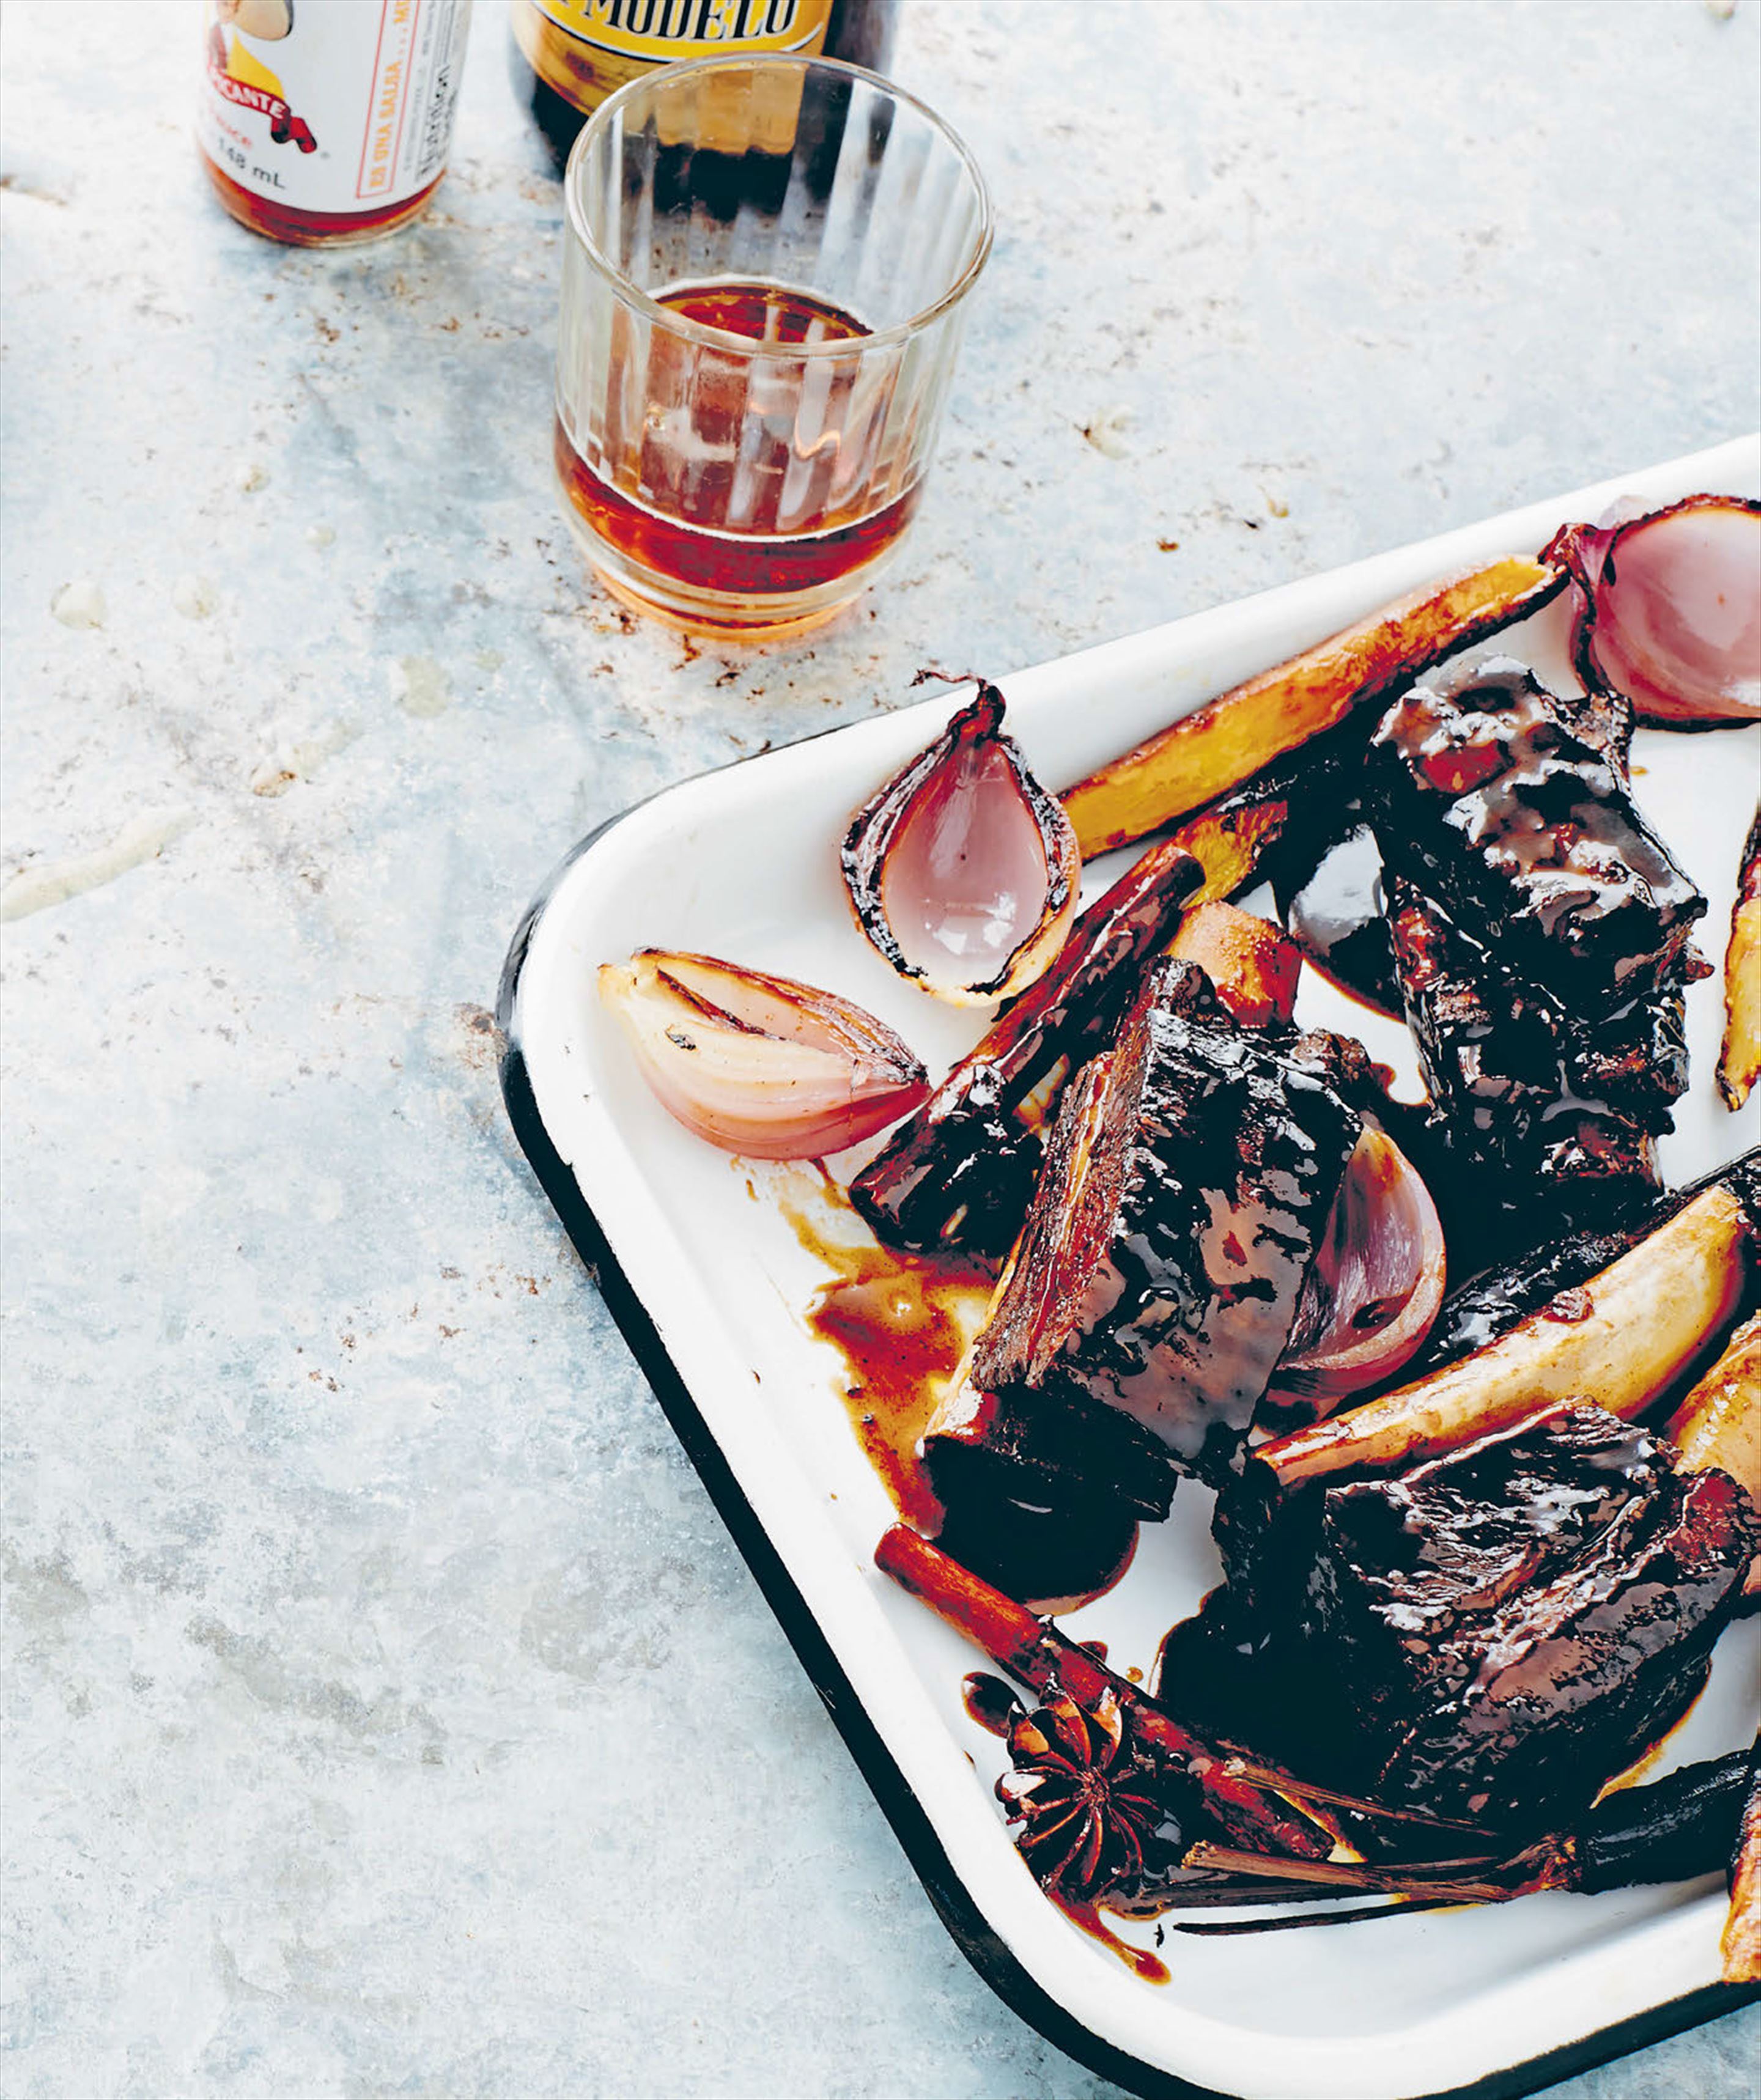 Low & slow beef short ribs with cerveza-caramelised onions & ancient grain salad